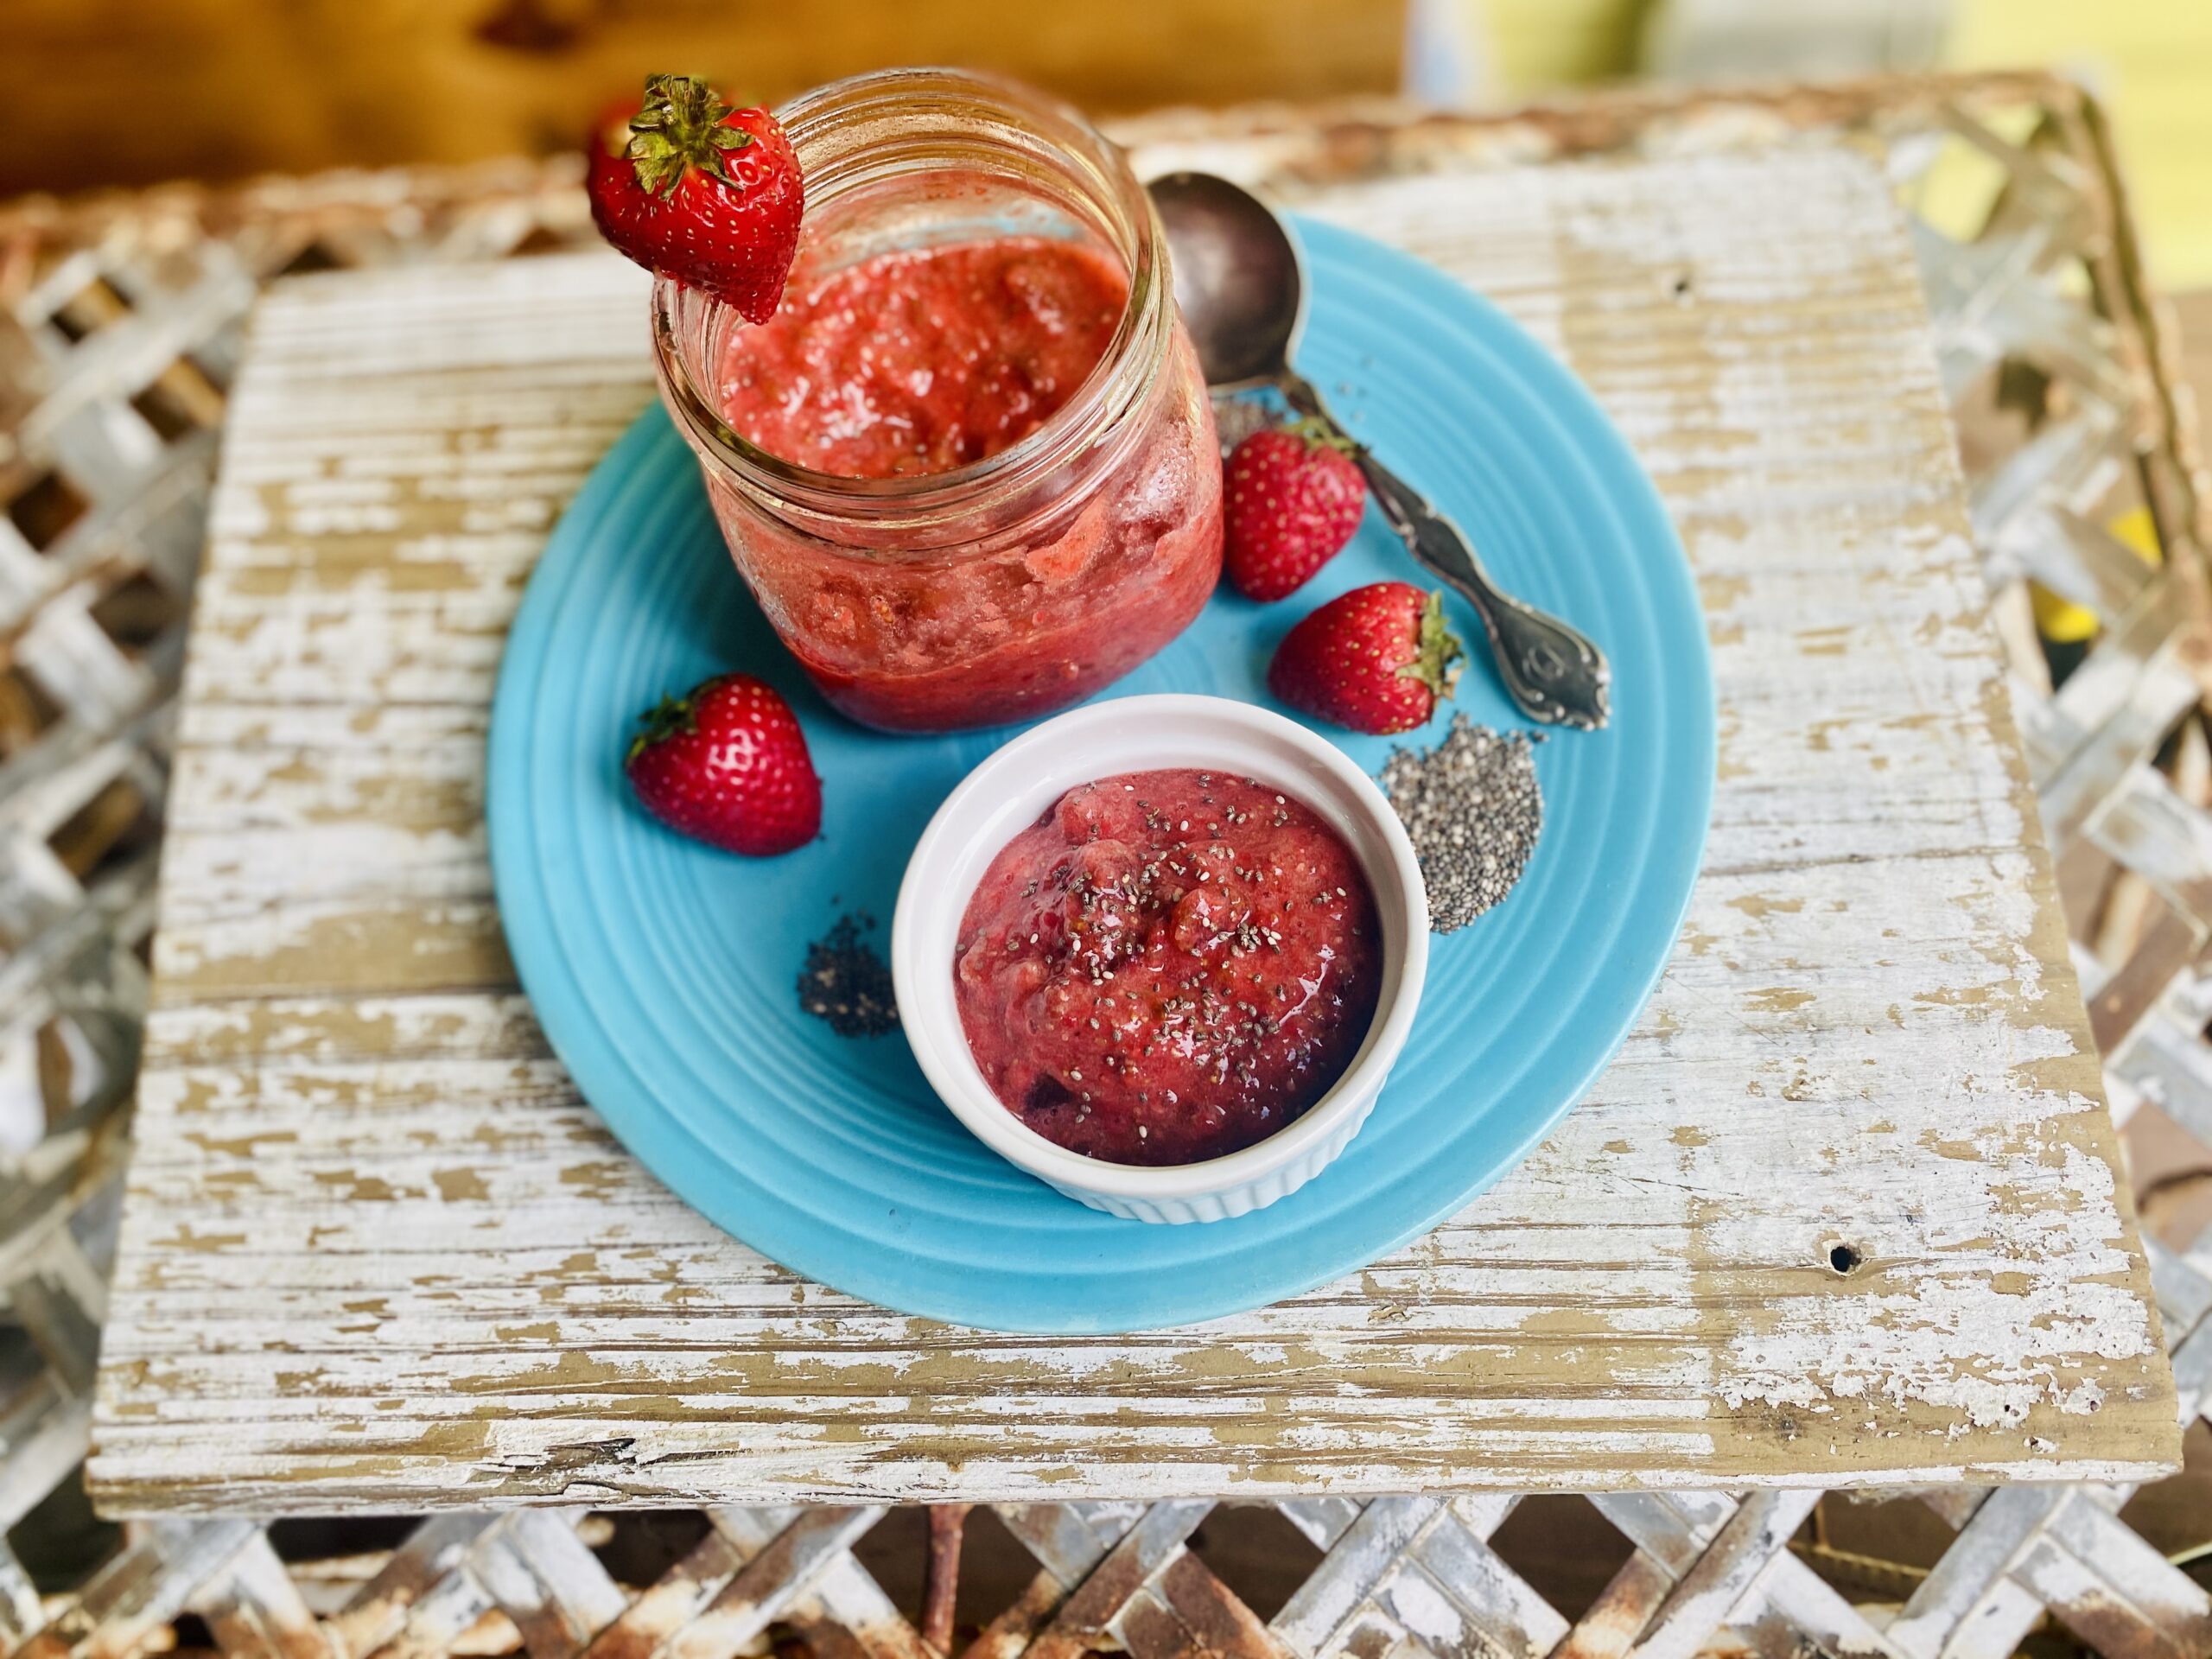 Featured image for “Strawberry chia compote”